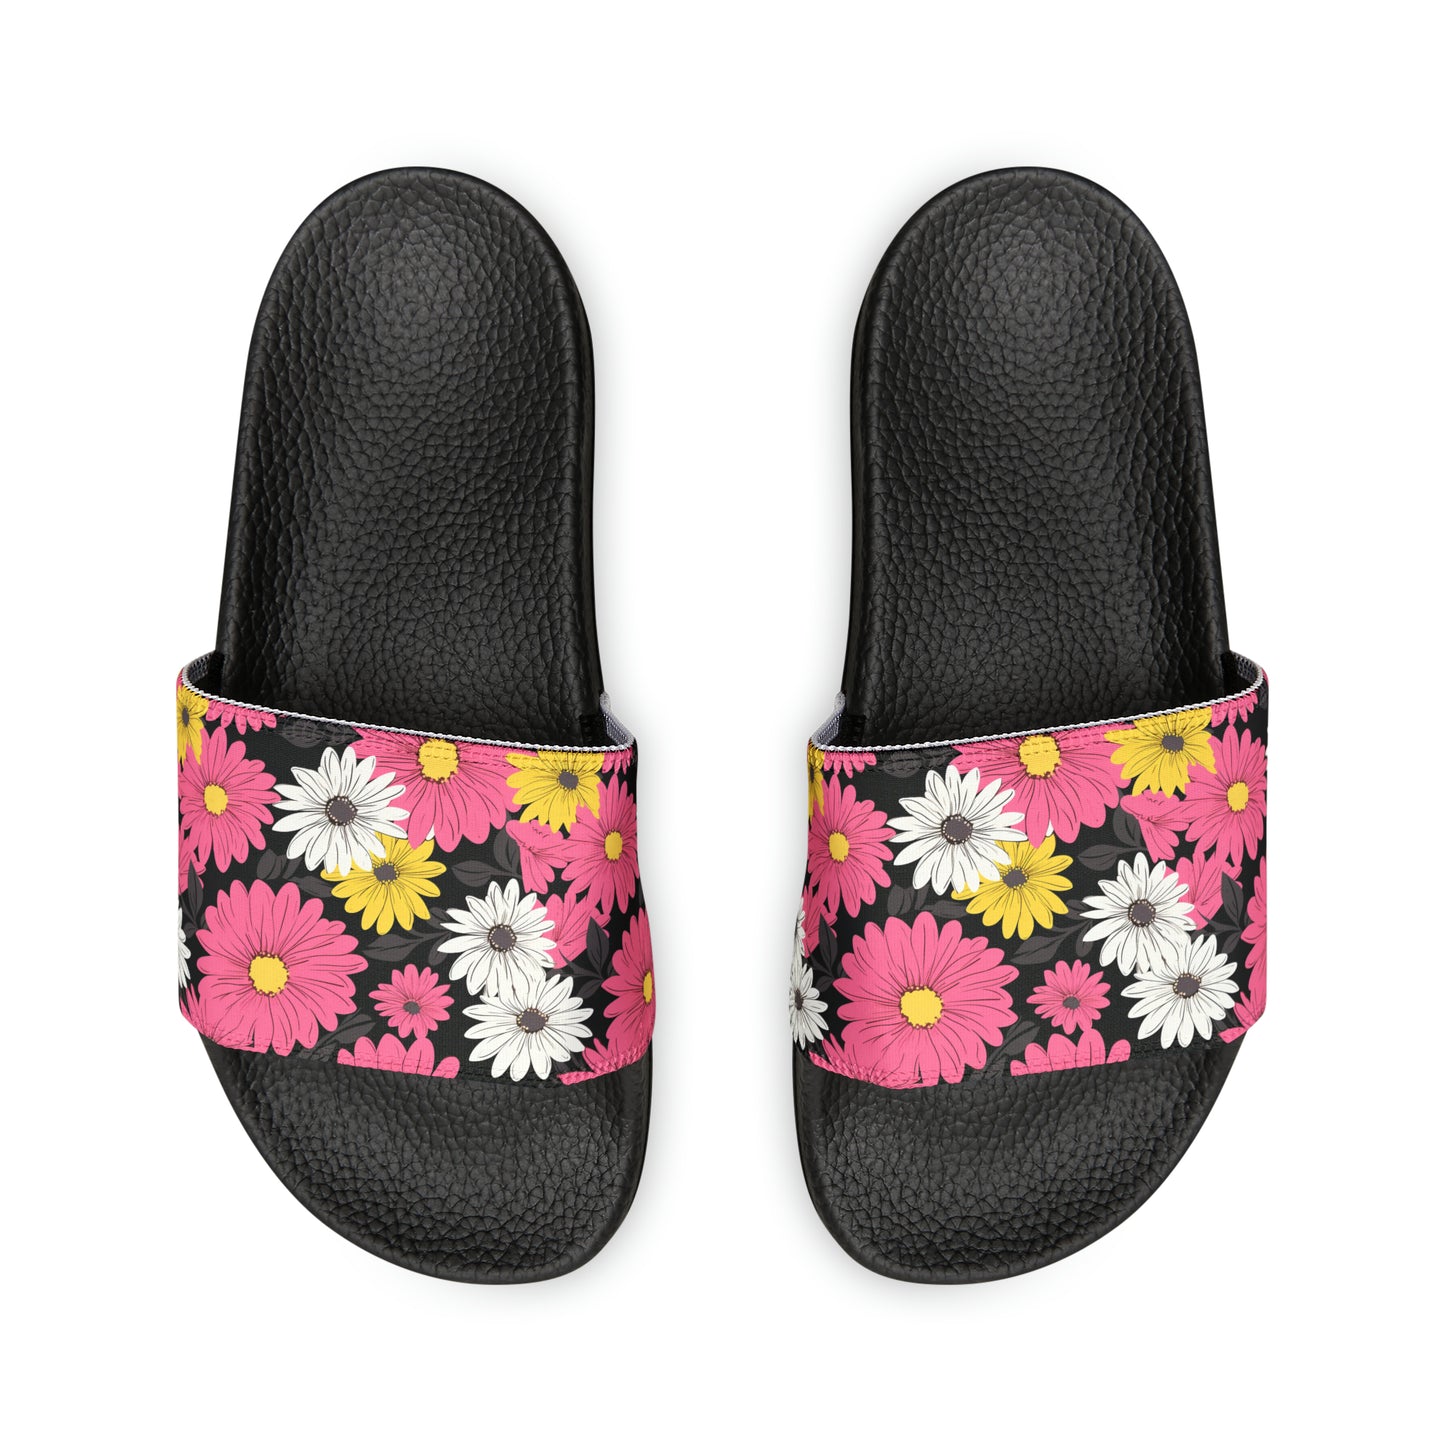 Flowers and Comfort for Her, Women's PU Slide Sandals